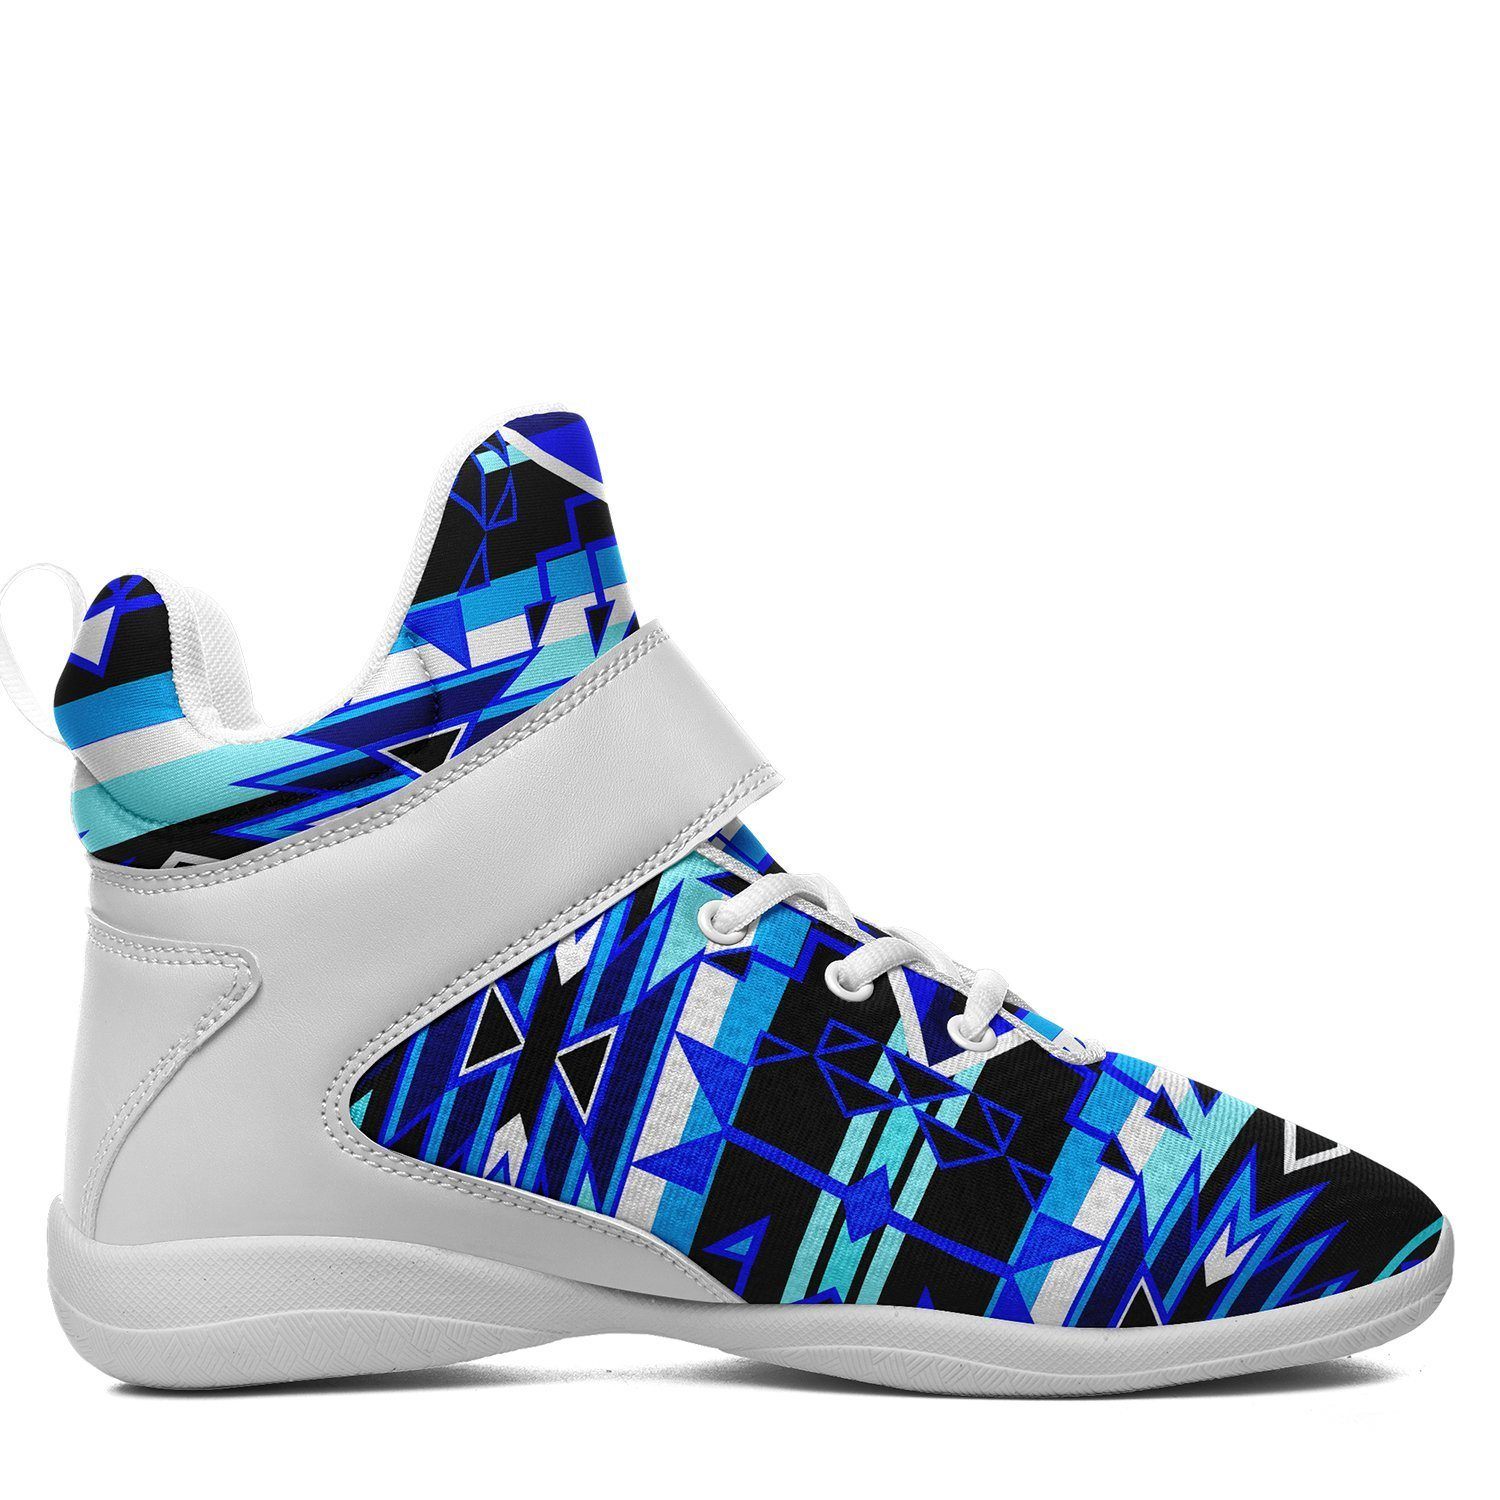 Force of Nature Winter Night Ipottaa Basketball / Sport High Top Shoes - White Sole 49 Dzine 